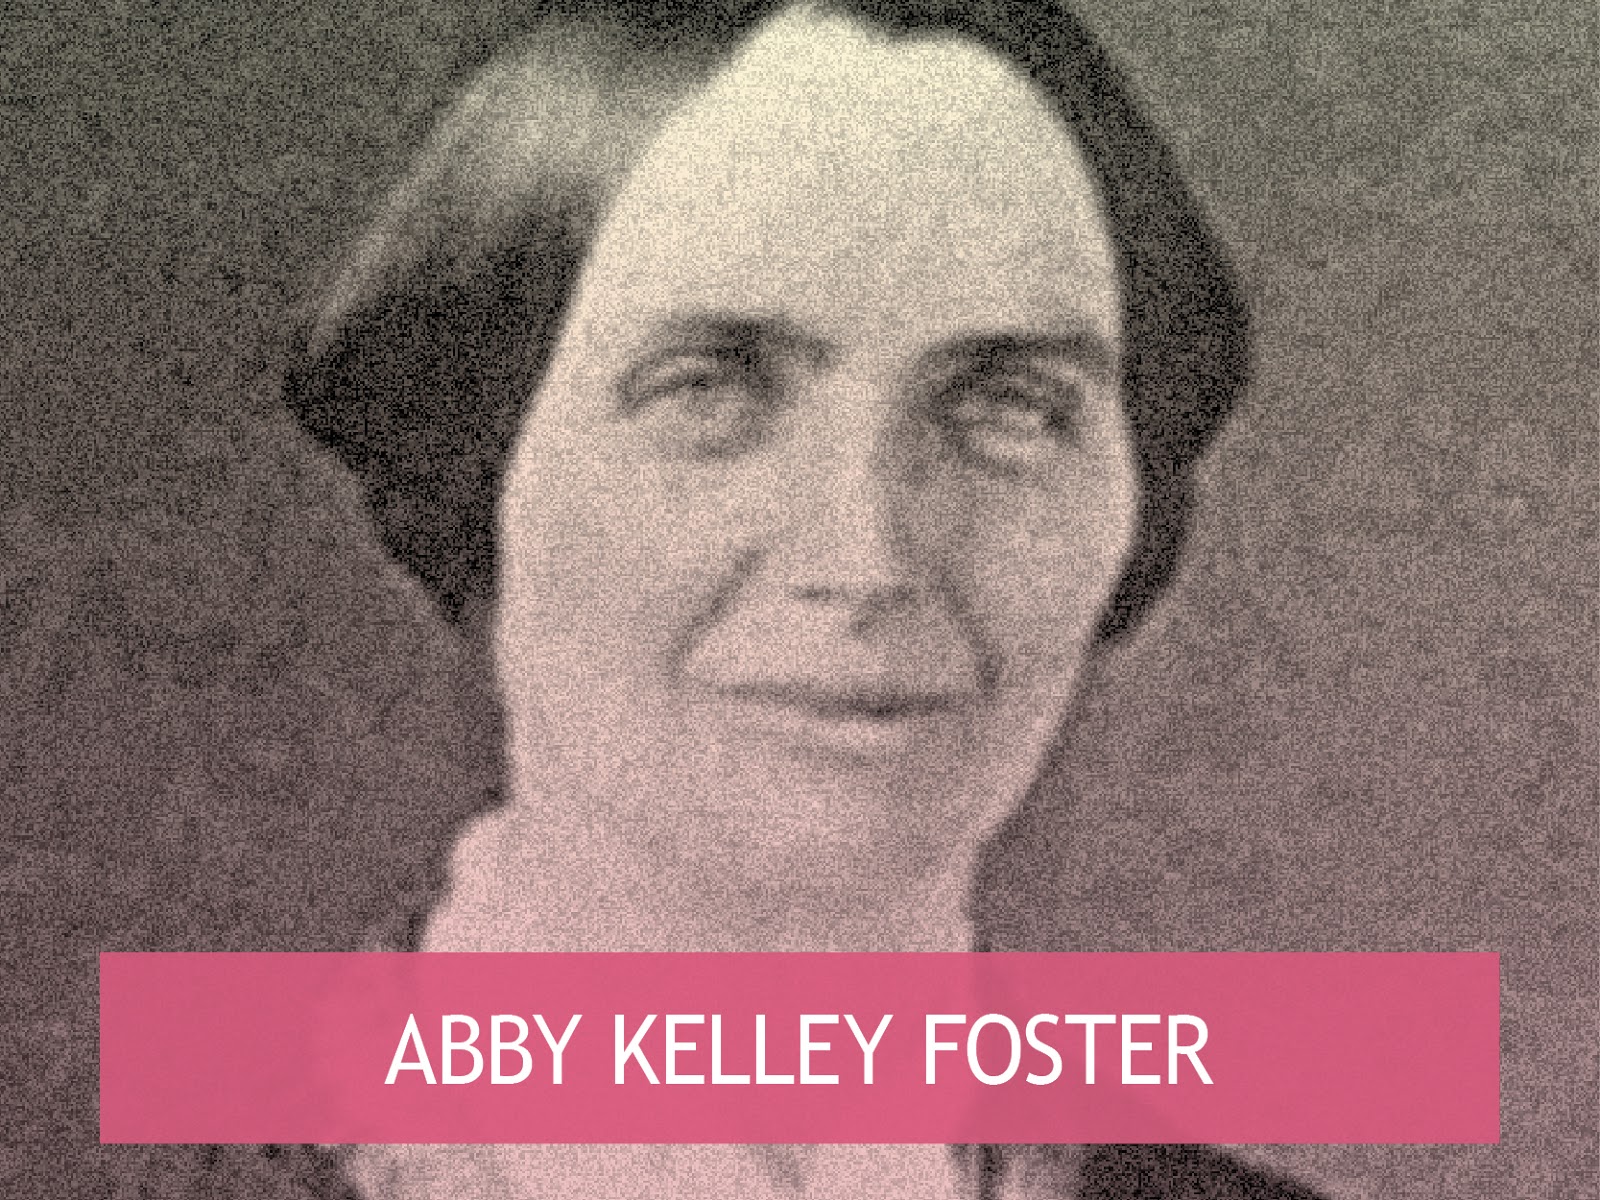 Antique Illustration Abby Kelley Foster Abolitionist Stock Illustration -  Download Image Now - iStock